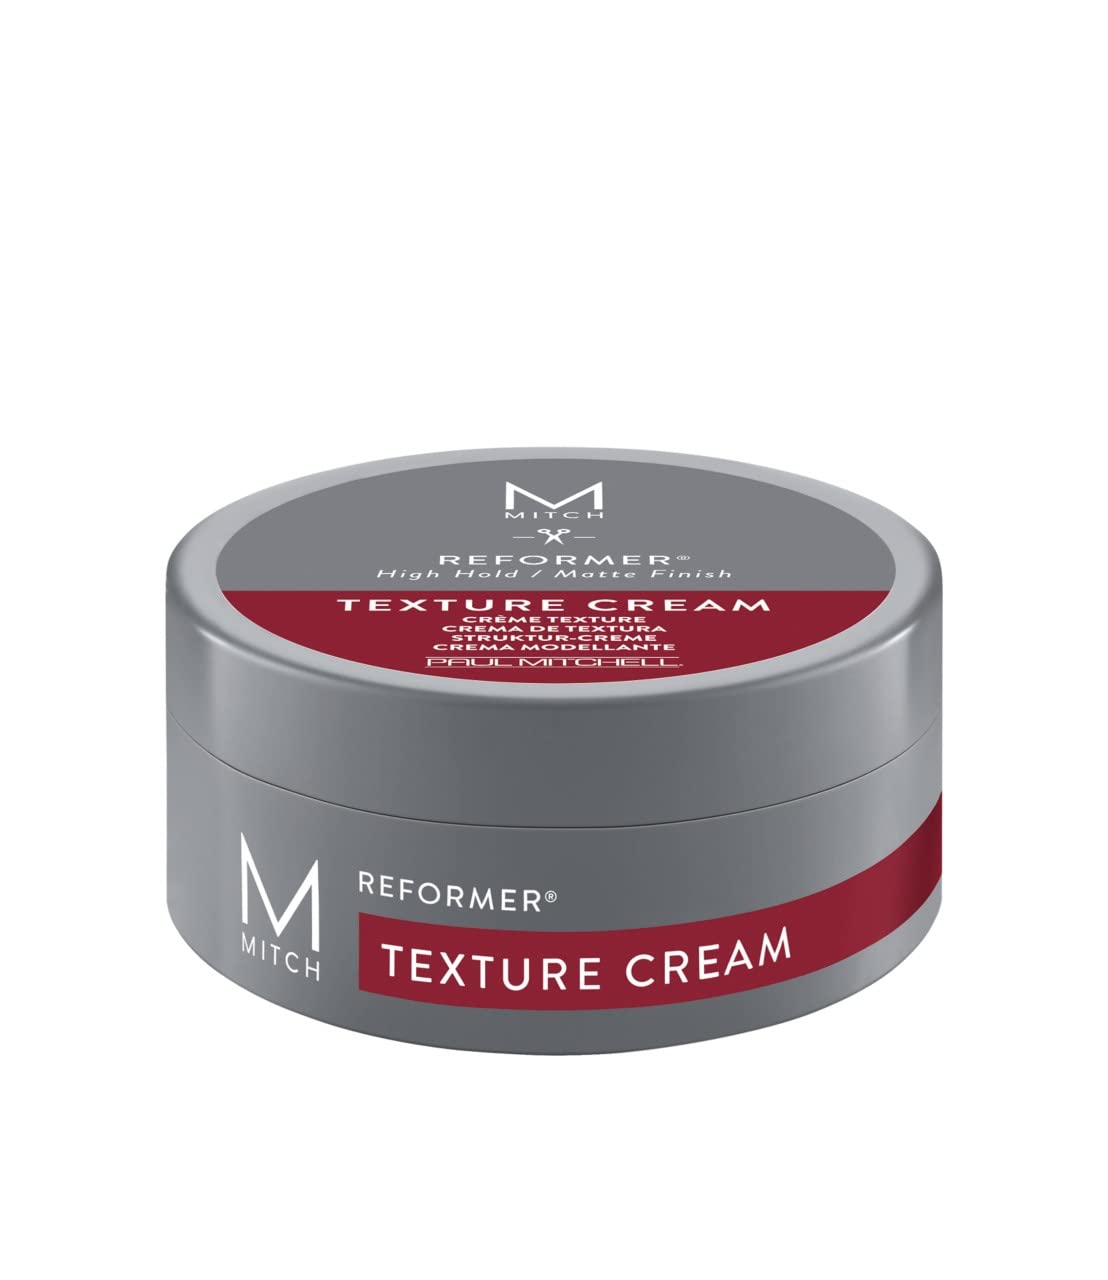 Buy Paul Mitchell MITCH Reformer Texturizing Hair Putty for Men, Strong  Hold, Matte Finish, For All Hair Types, Especially Fine to Medium Hair, 3  Oz | Fado168